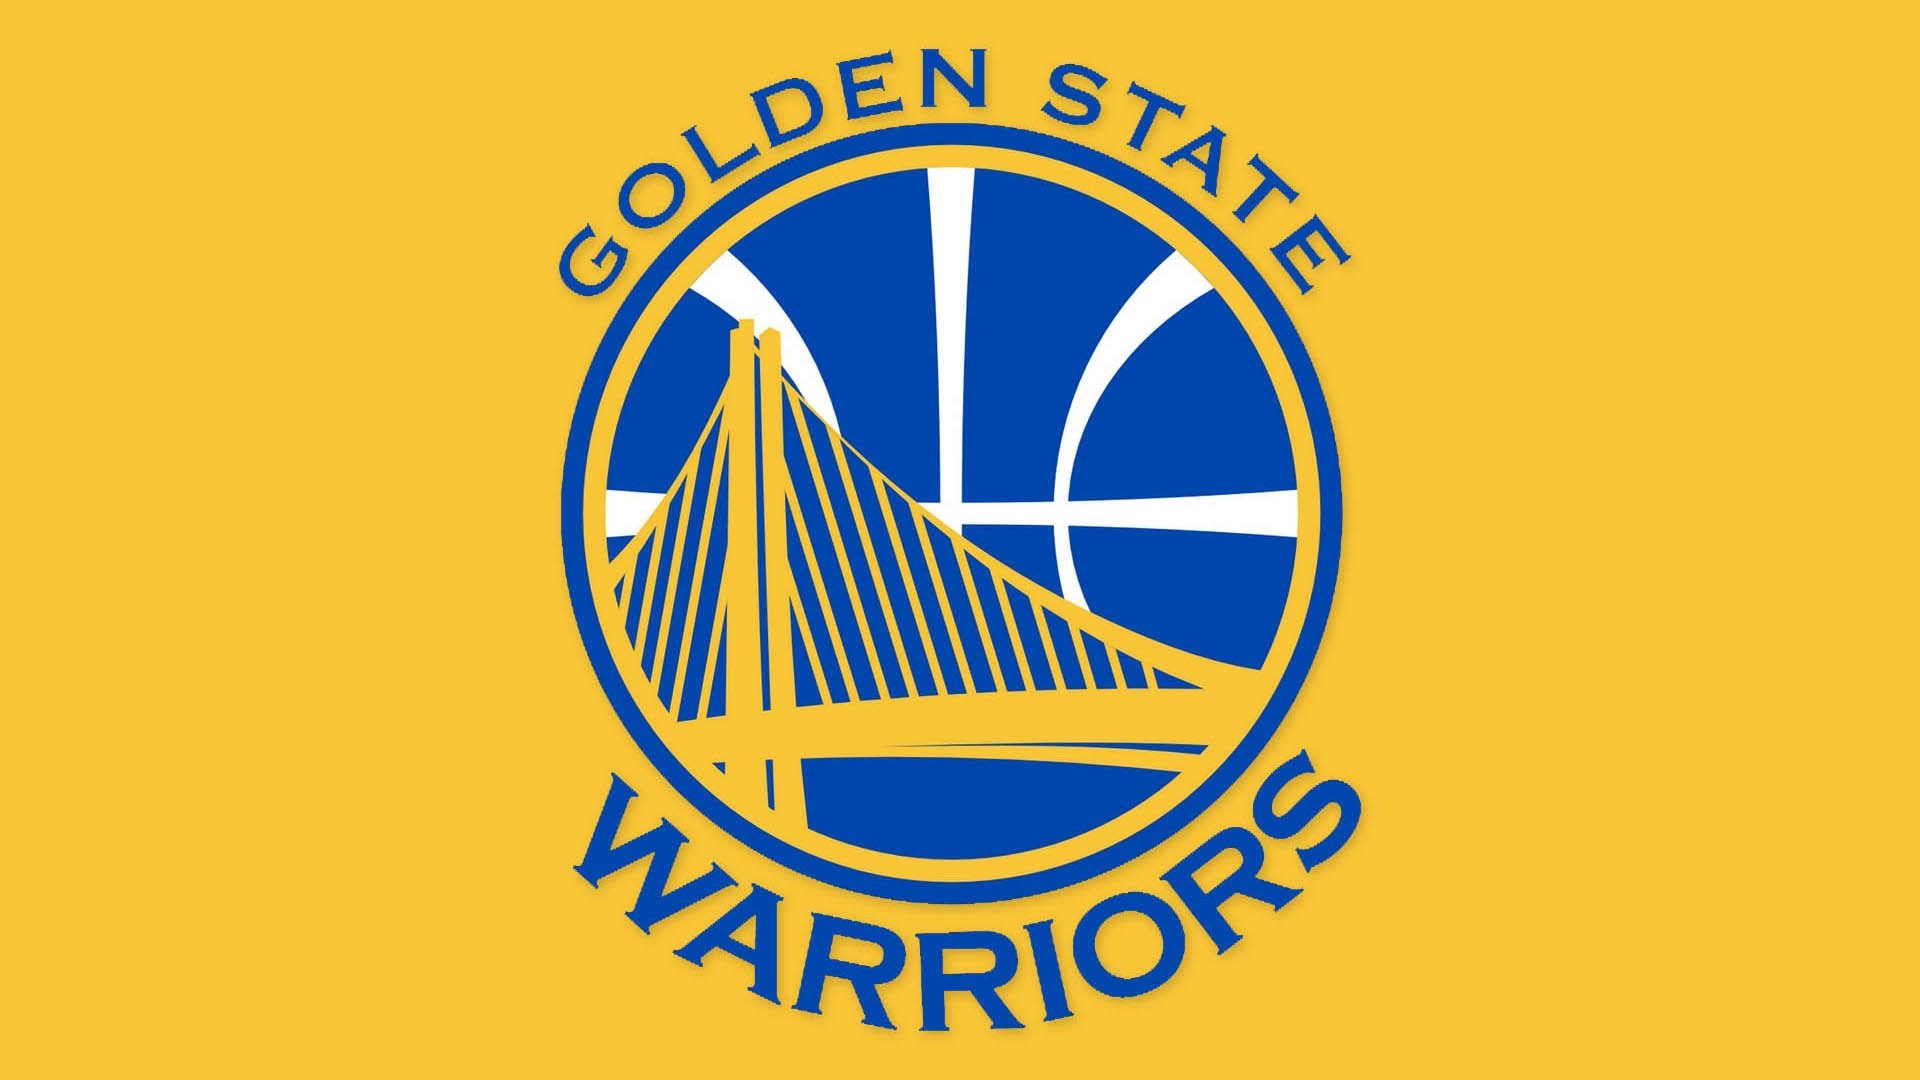 1920x1080 golden state warriors image: Full HD Pictures - golden state warriors  category